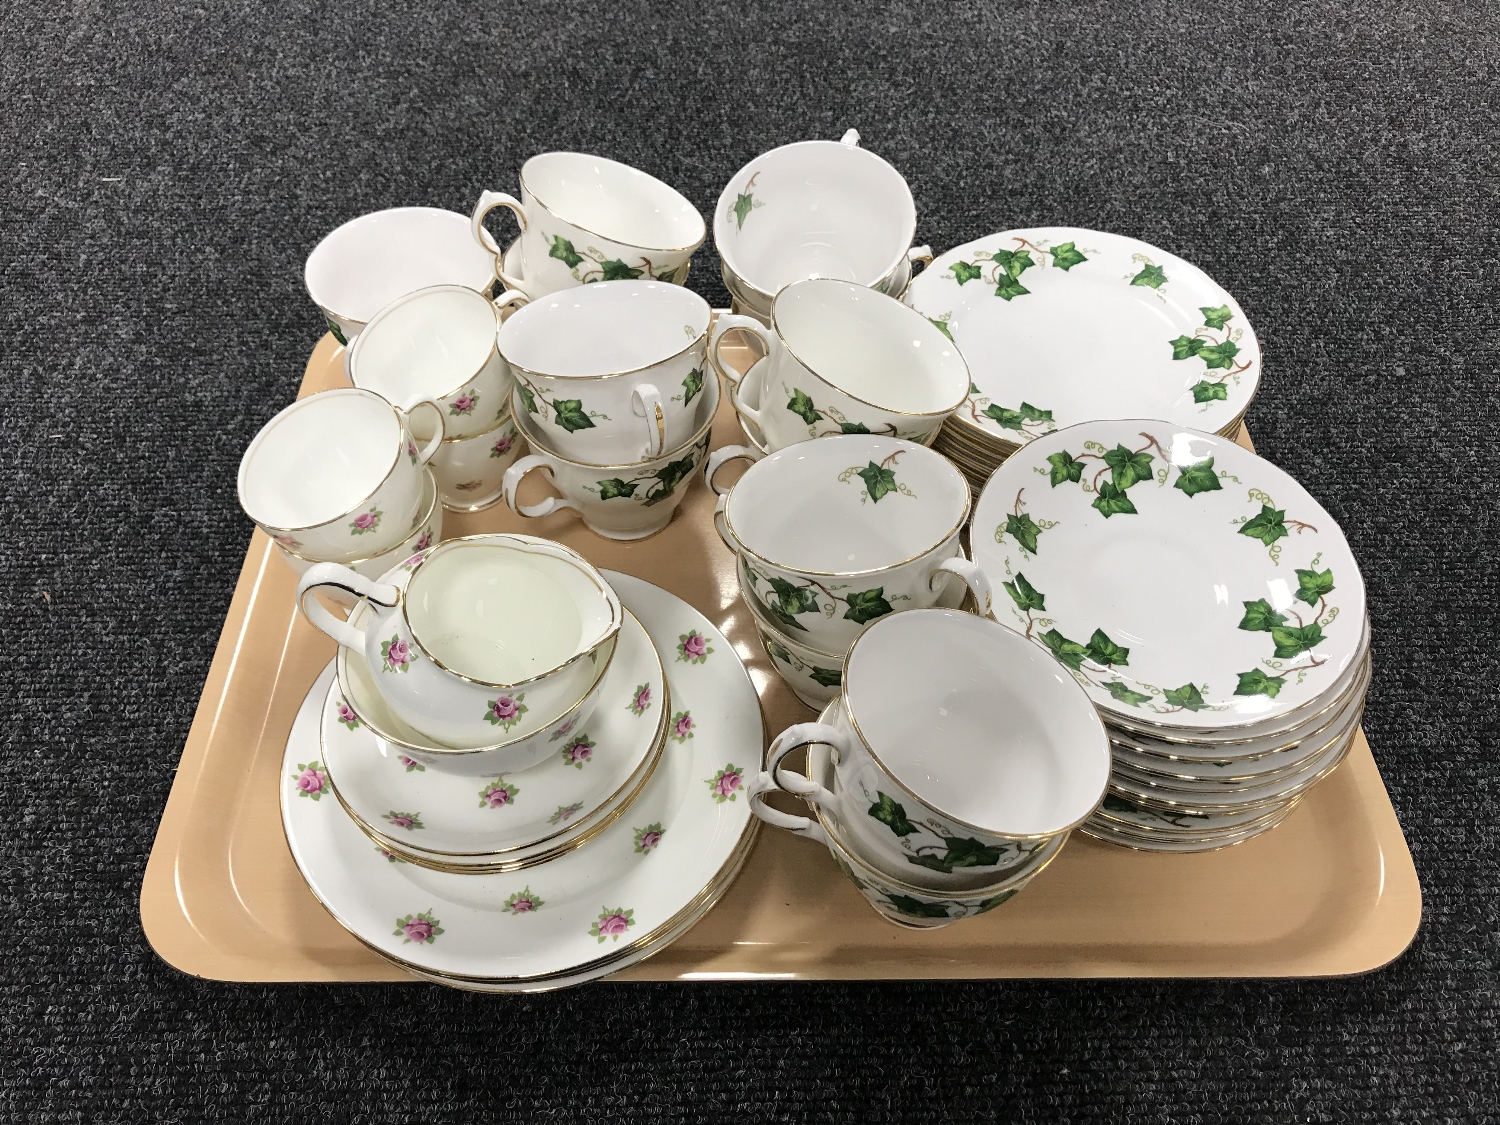 A tray of twelve pieces of Old Royal bone china tea china and thirty seven pieces of Colclough bone